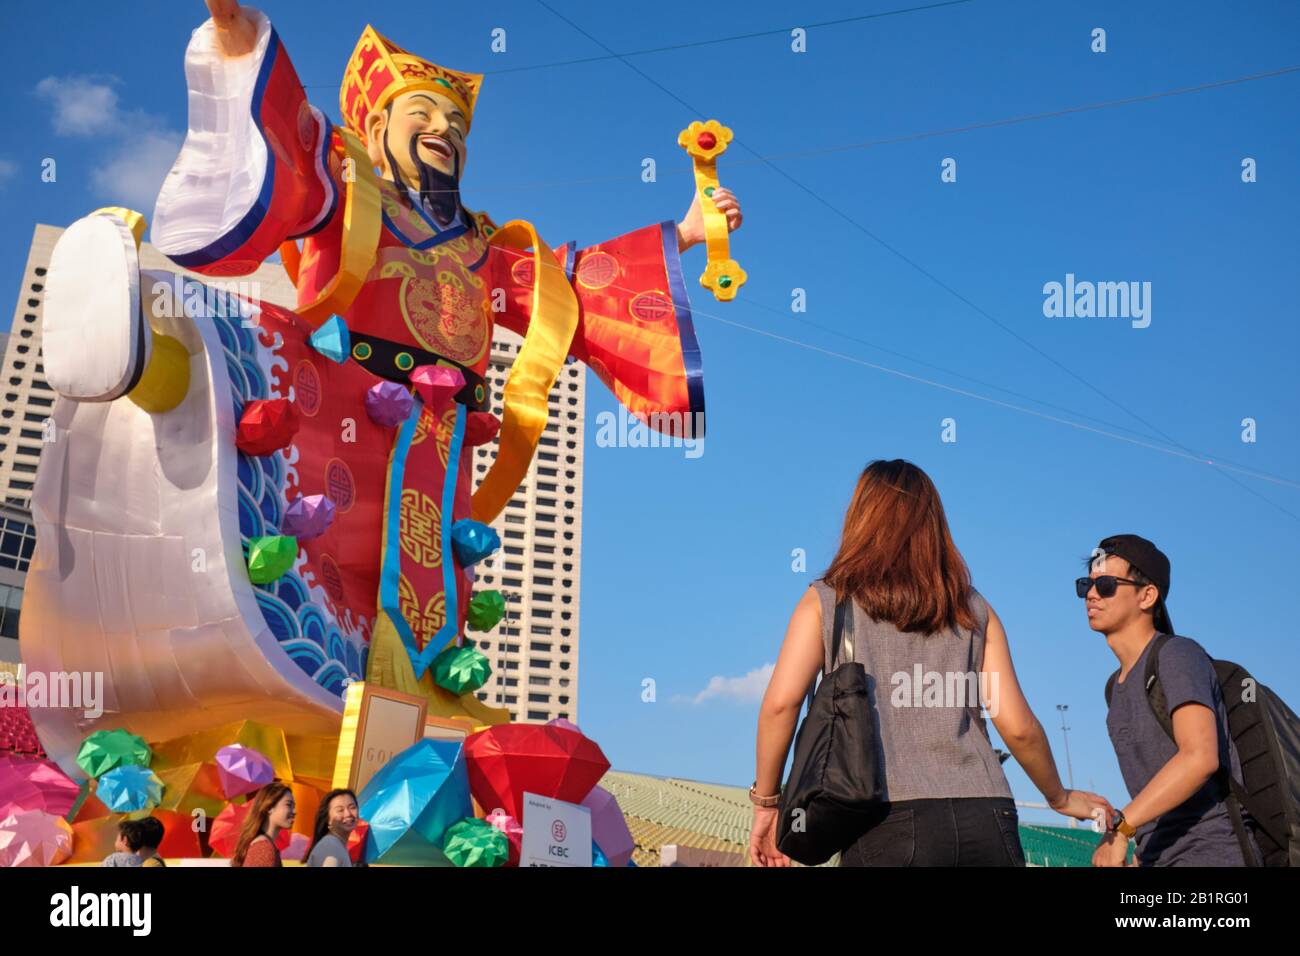 A tourist couple at thestatue of the Chinese God of Good Fortune / Wealth, erected for Chinese New Year celebrations; Esplanade, Marina Bay, Singapore Stock Photo